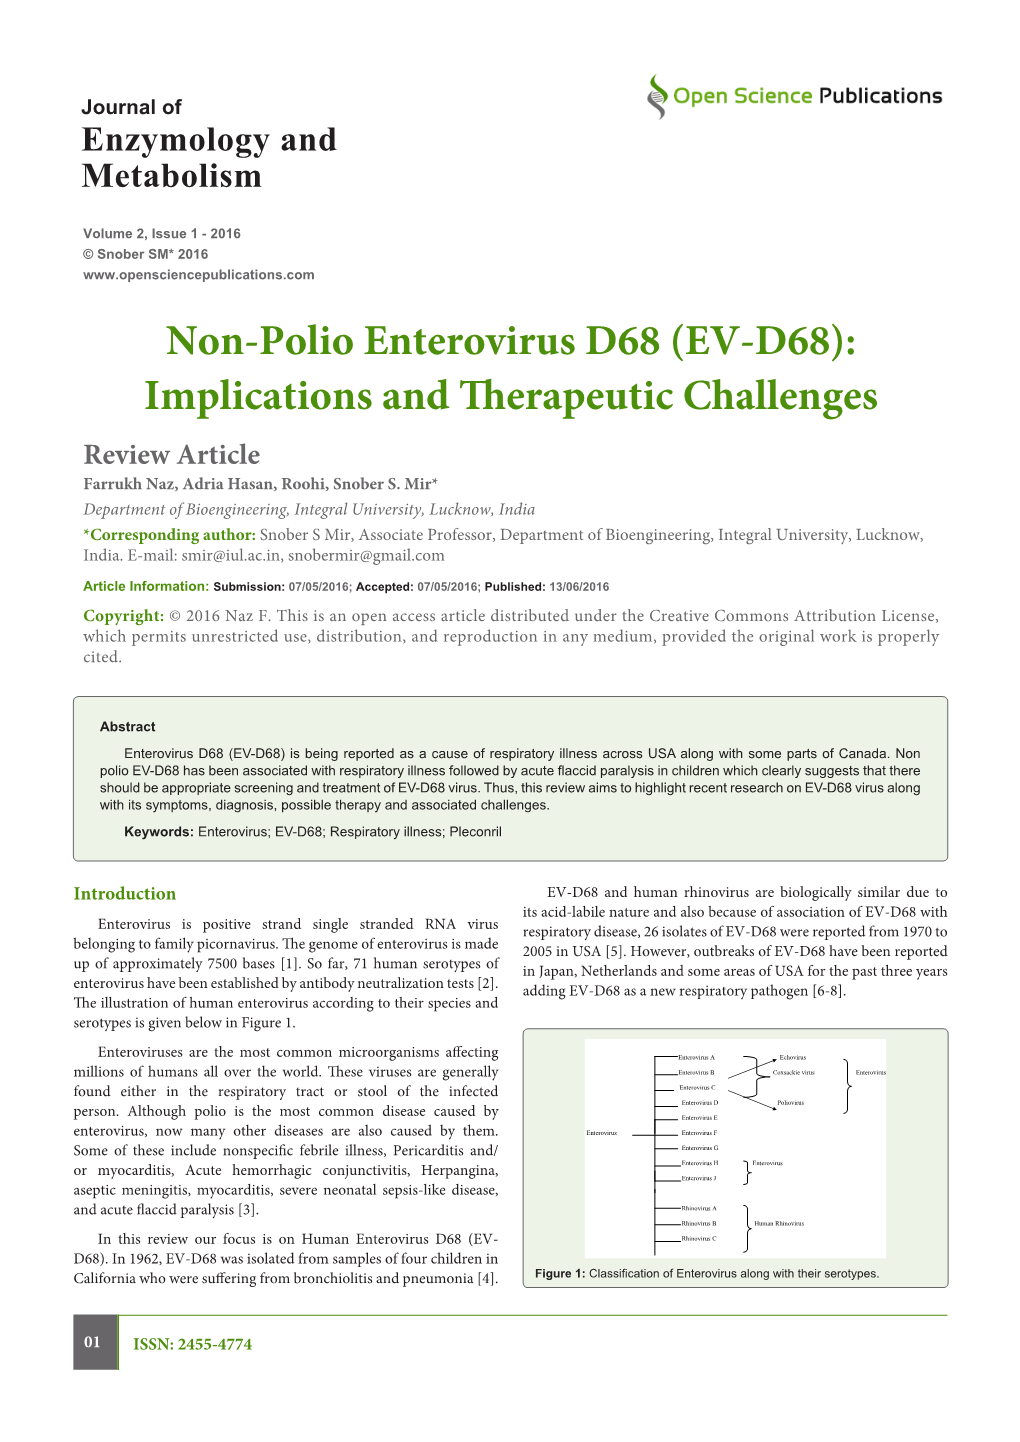 Non-Polio Enterovirus D68 (EV-D68): Implications and Therapeutic Challenges Review Article Farrukh Naz, Adria Hasan, Roohi, Snober S